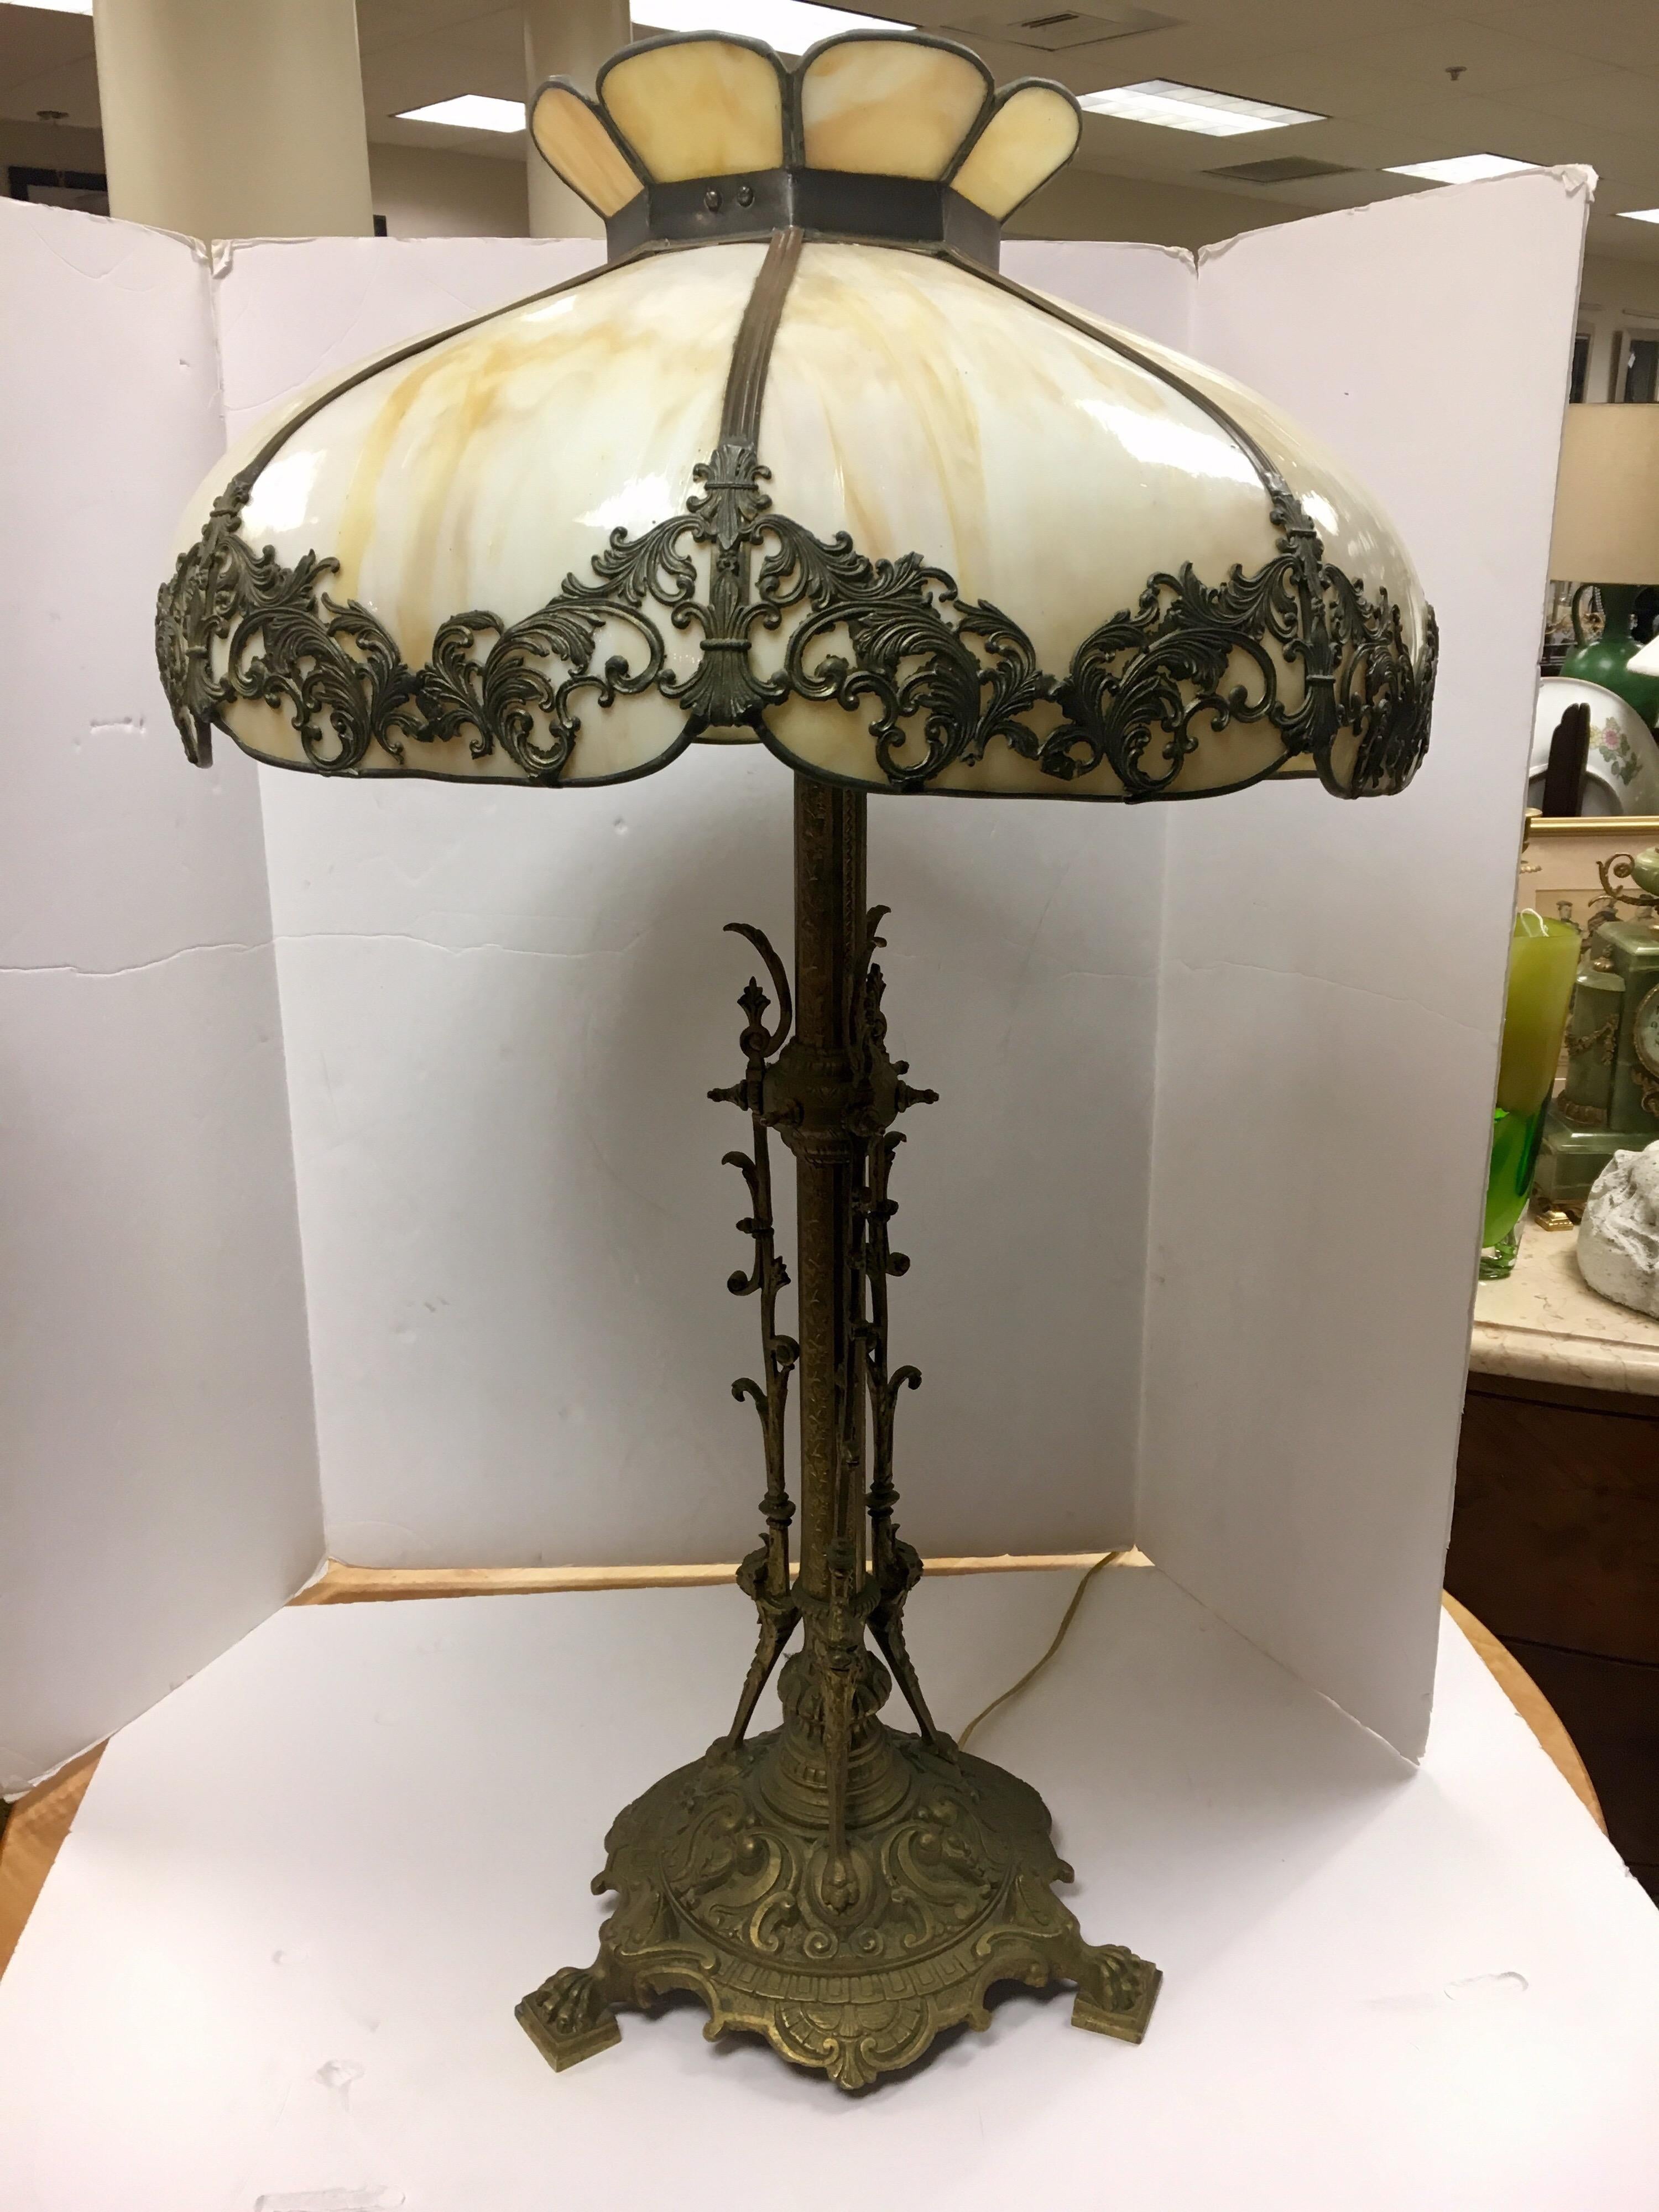 Magnificent, large scale slag glass table lamp from the 1920s.